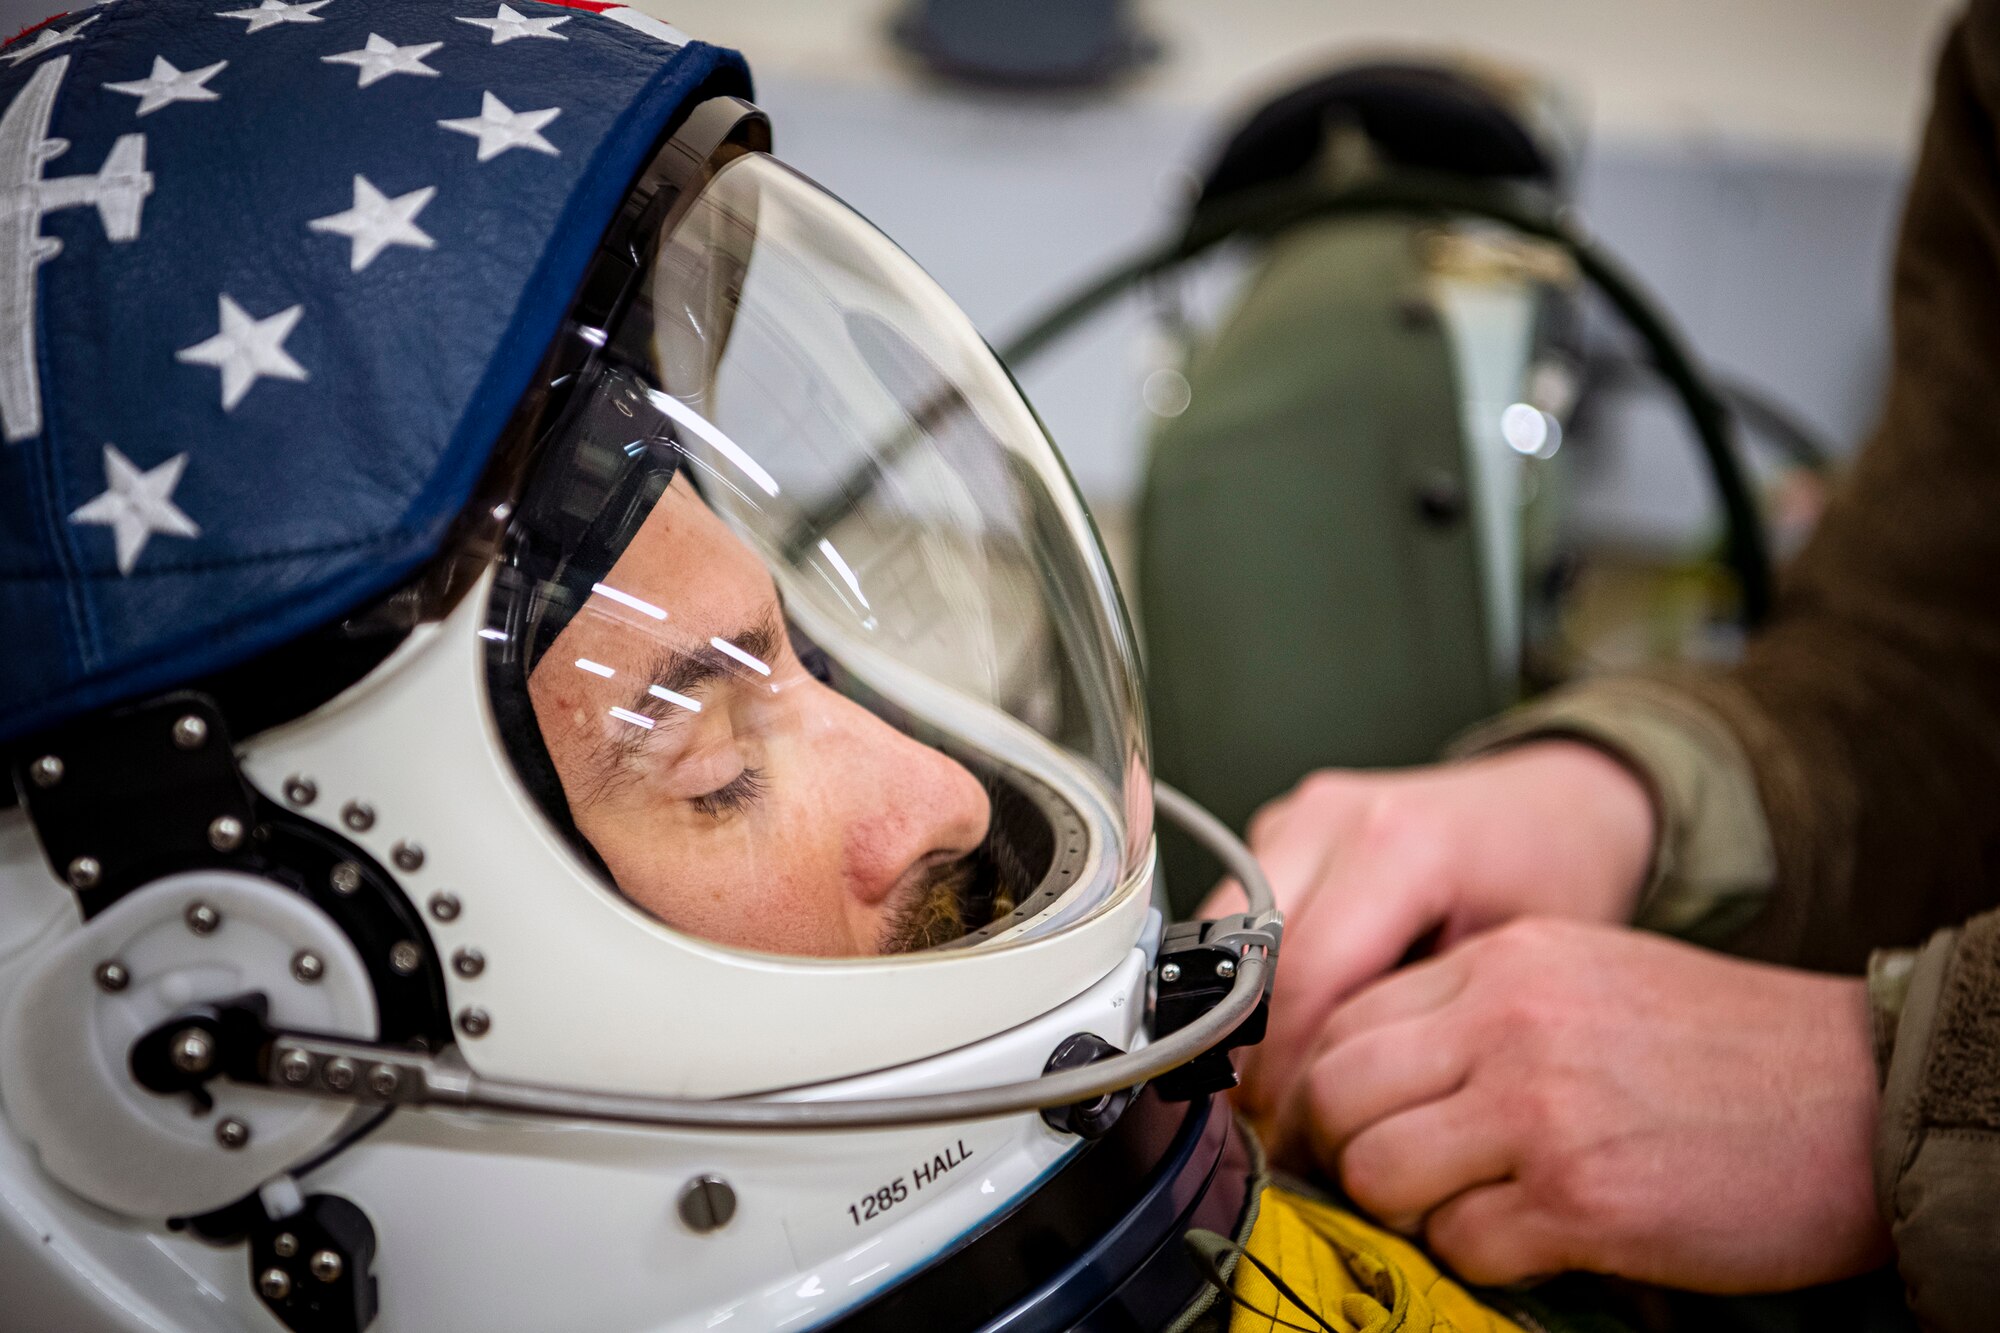 U.S. Air Force Capt. Joshua Hall, left, 99th Reconnaissance Squadron U-2 Dragon Lady pilot, receives suit preparations at RAF Fairford, England, July 8, 2020. The U-2 aircraft assigned to the 9th Reconnaissance Wing, Beale Air Force Base, Calif., are currently deployed to RAF Fairford as part of the 99th Expeditionary Reconnaissance Squadron. The aircraft supplements a variety of missions that enhance regional and global security support in support of U.S. and NATO allies and regional partners. (U.S. Air Force photo by Senior Airman Eugene Oliver)